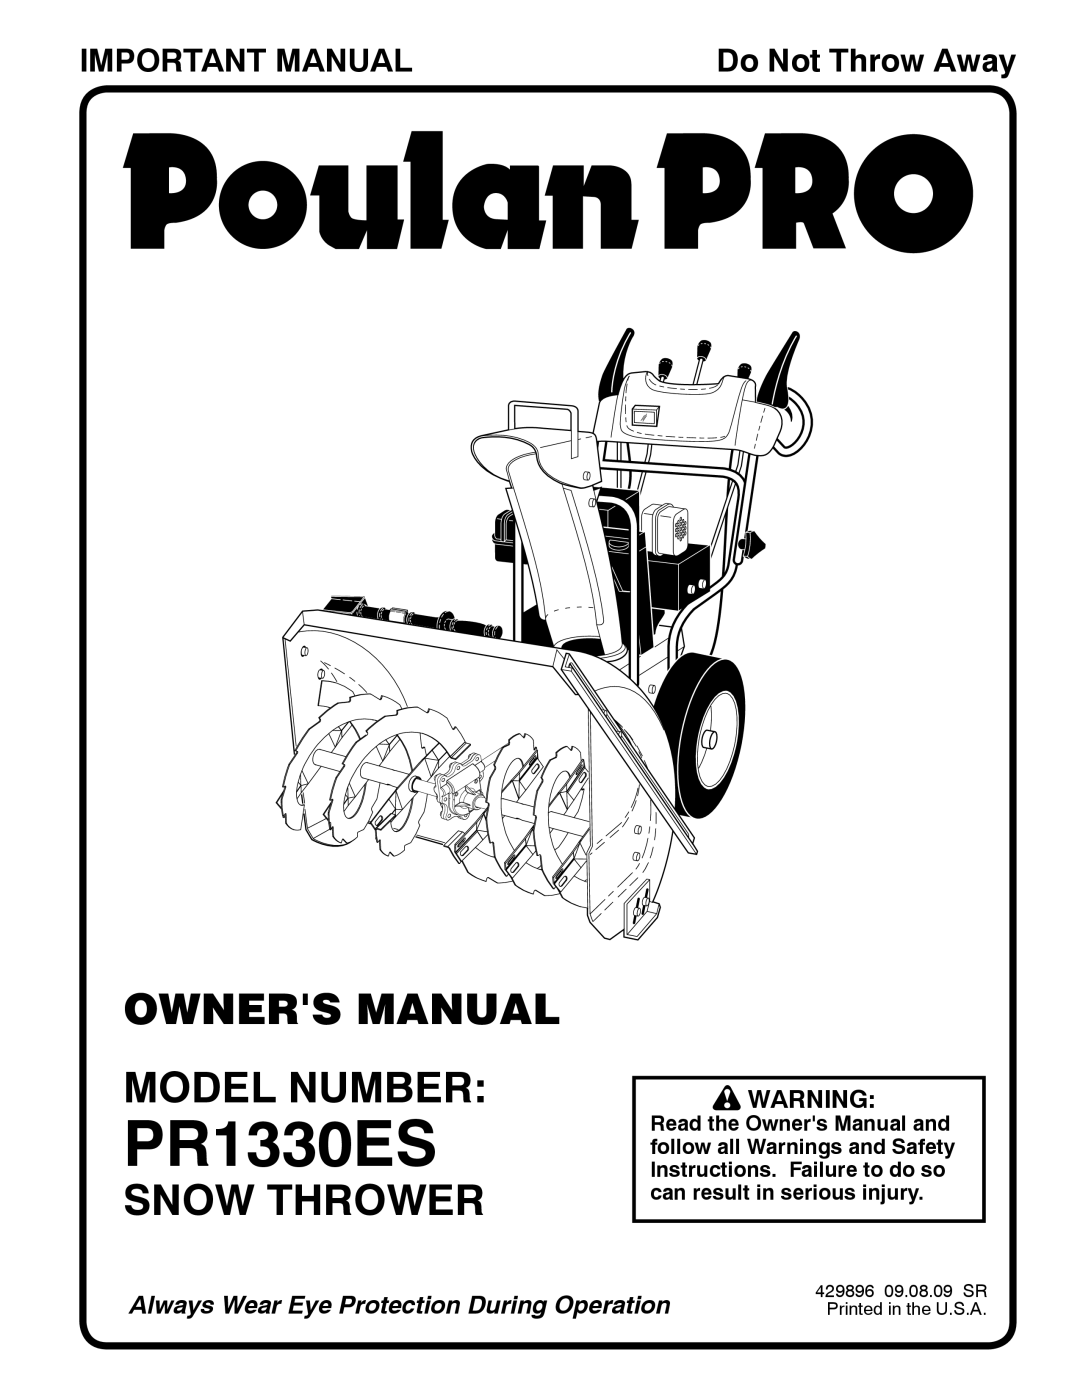 Poulan 96192003201 owner manual Owners Manual Model Number, Snow Thrower, Important Manual, PR1330ES, Do Not Throw Away 